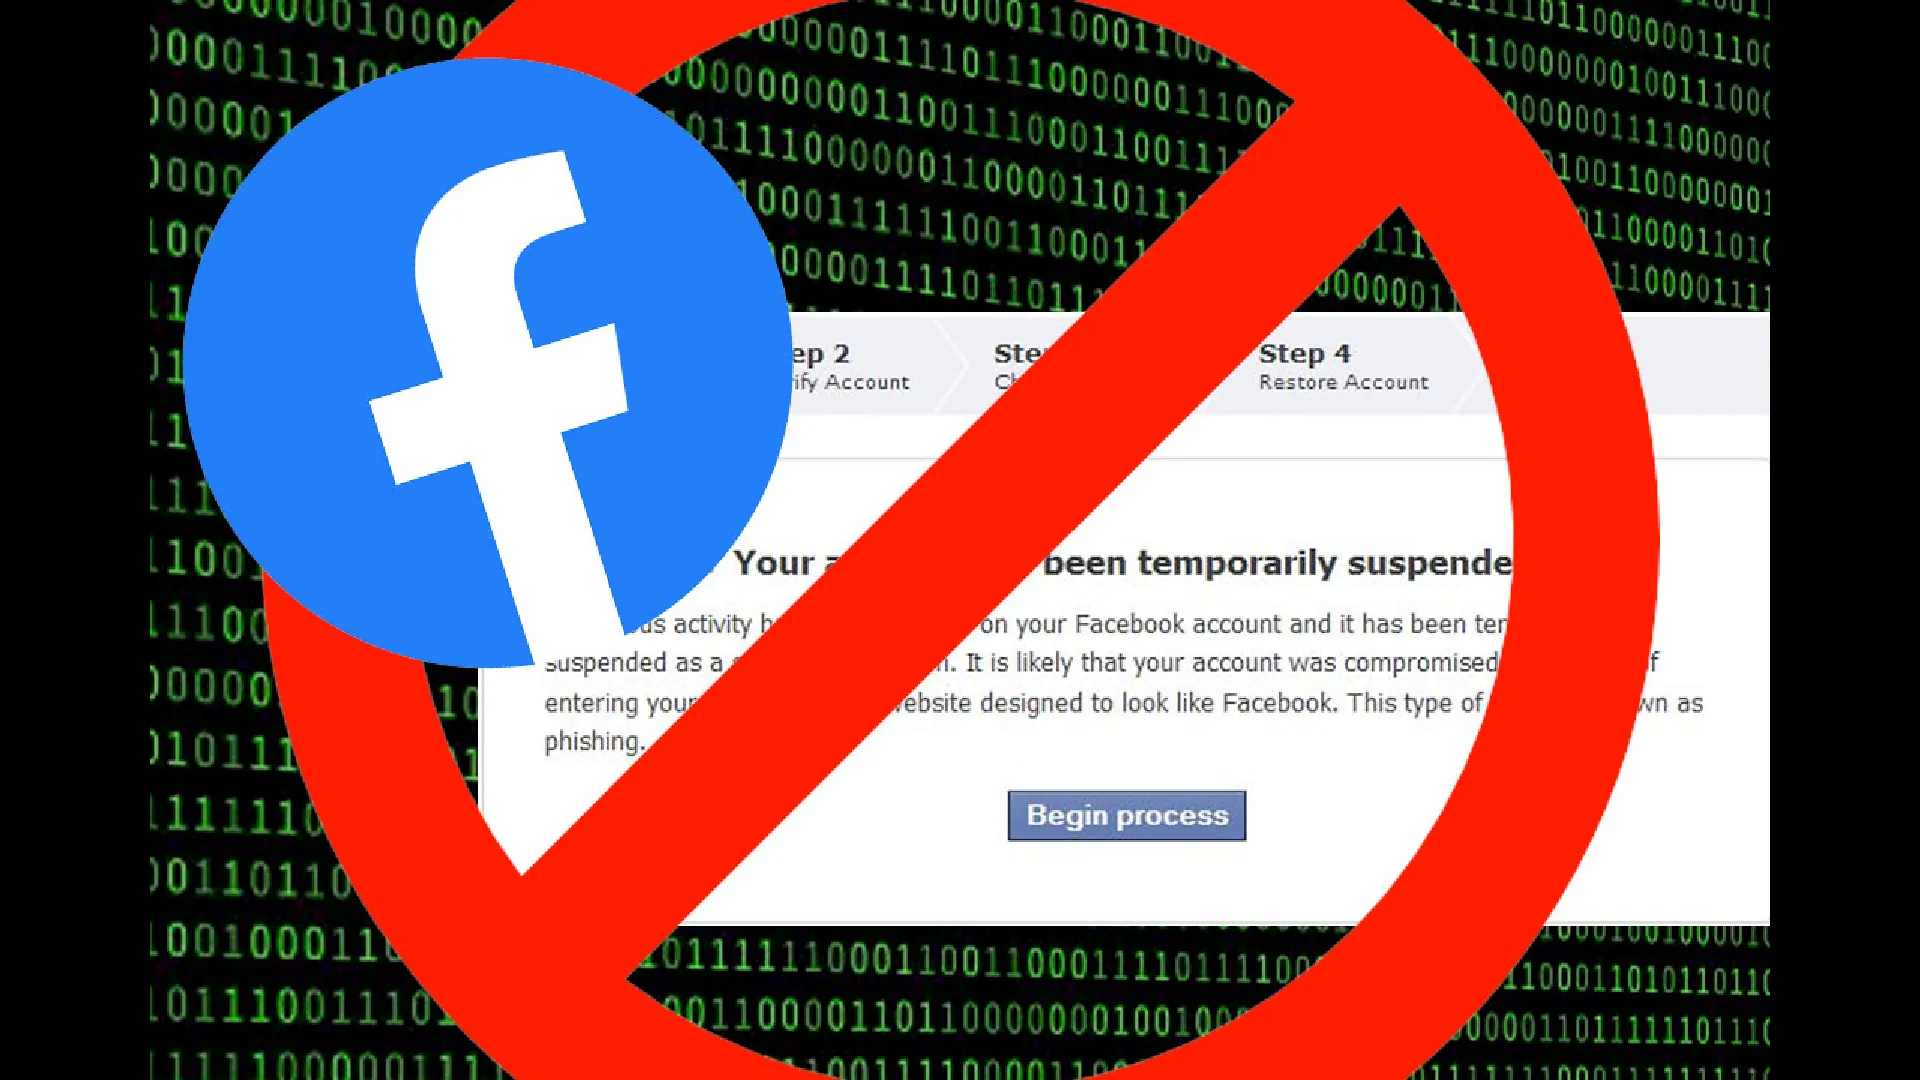 Facebook Users Frustrated as Automated System Incorrectly Suspends Accounts